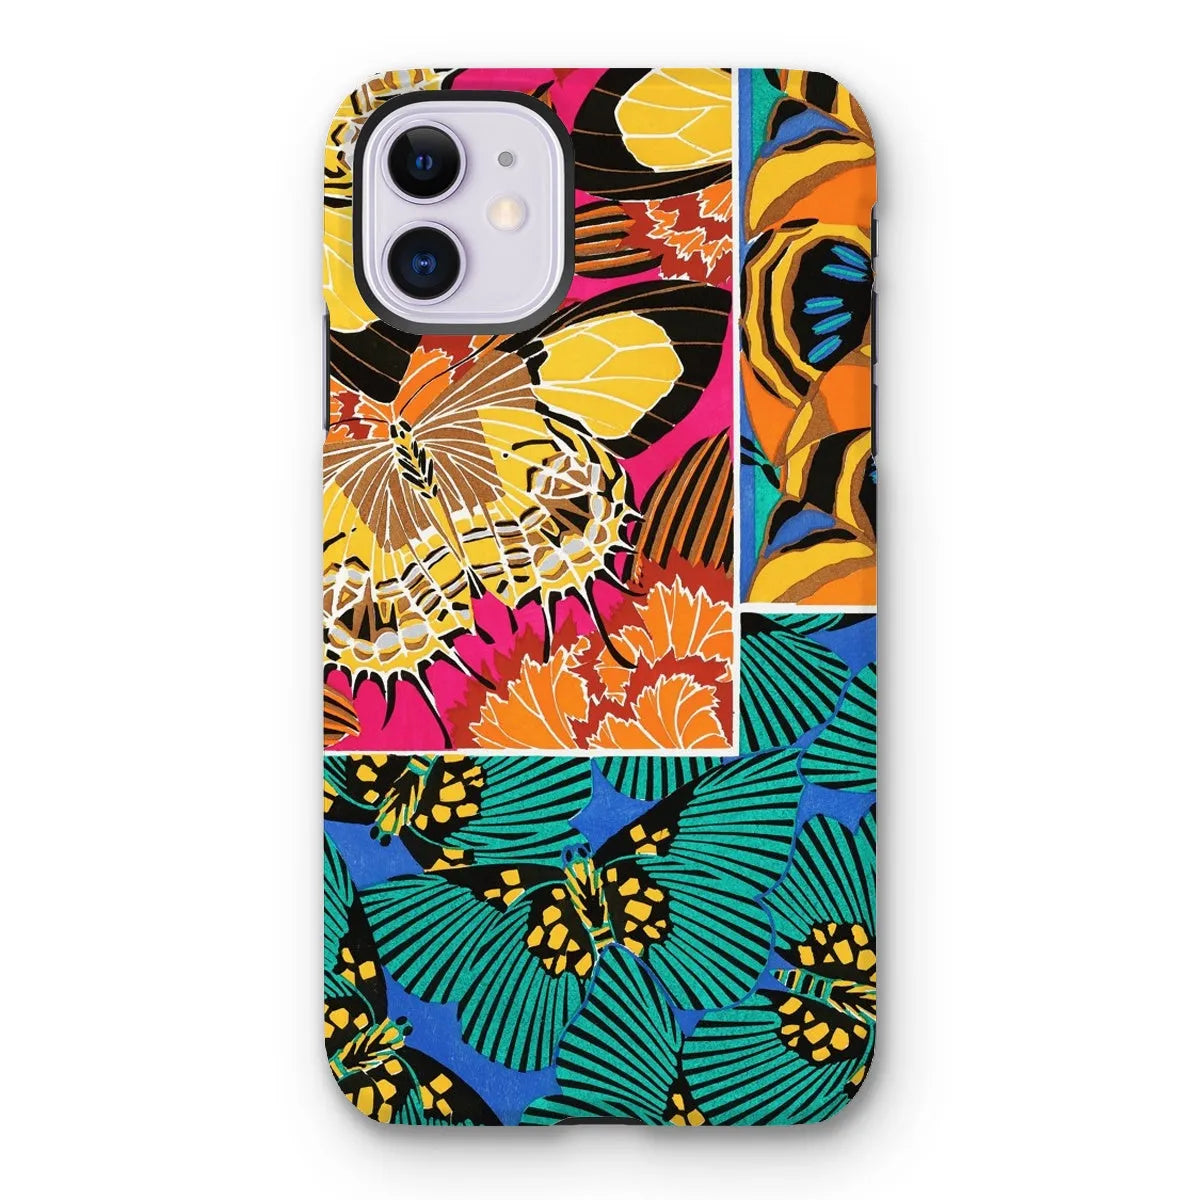 Rainbow Butterfly Aesthetic Art Phone Case - E.a. Seguy - Iphone 11 / Matte - Mobile Phone Cases - Aesthetic Art